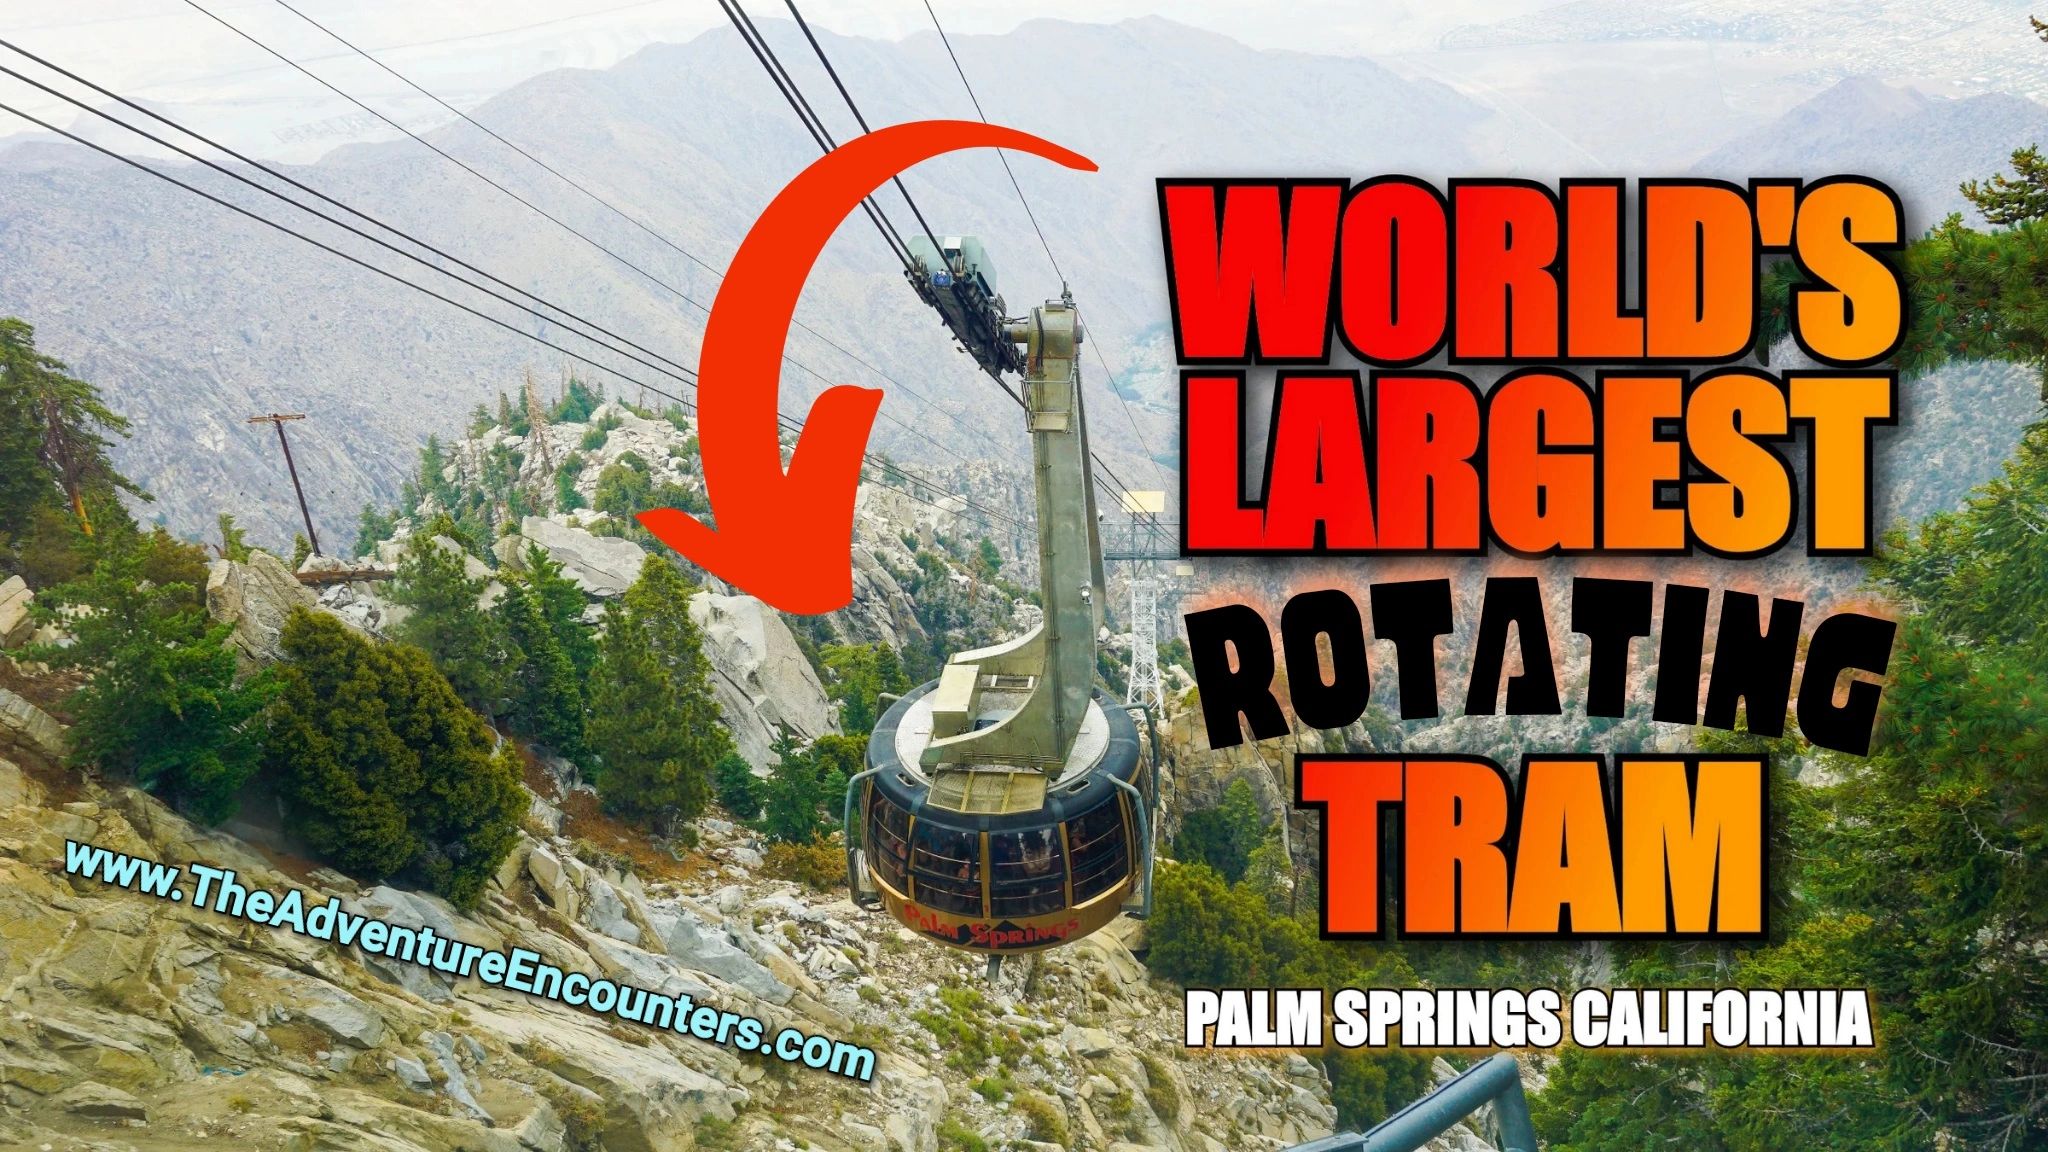 world's largest tramway in Palm Springs California